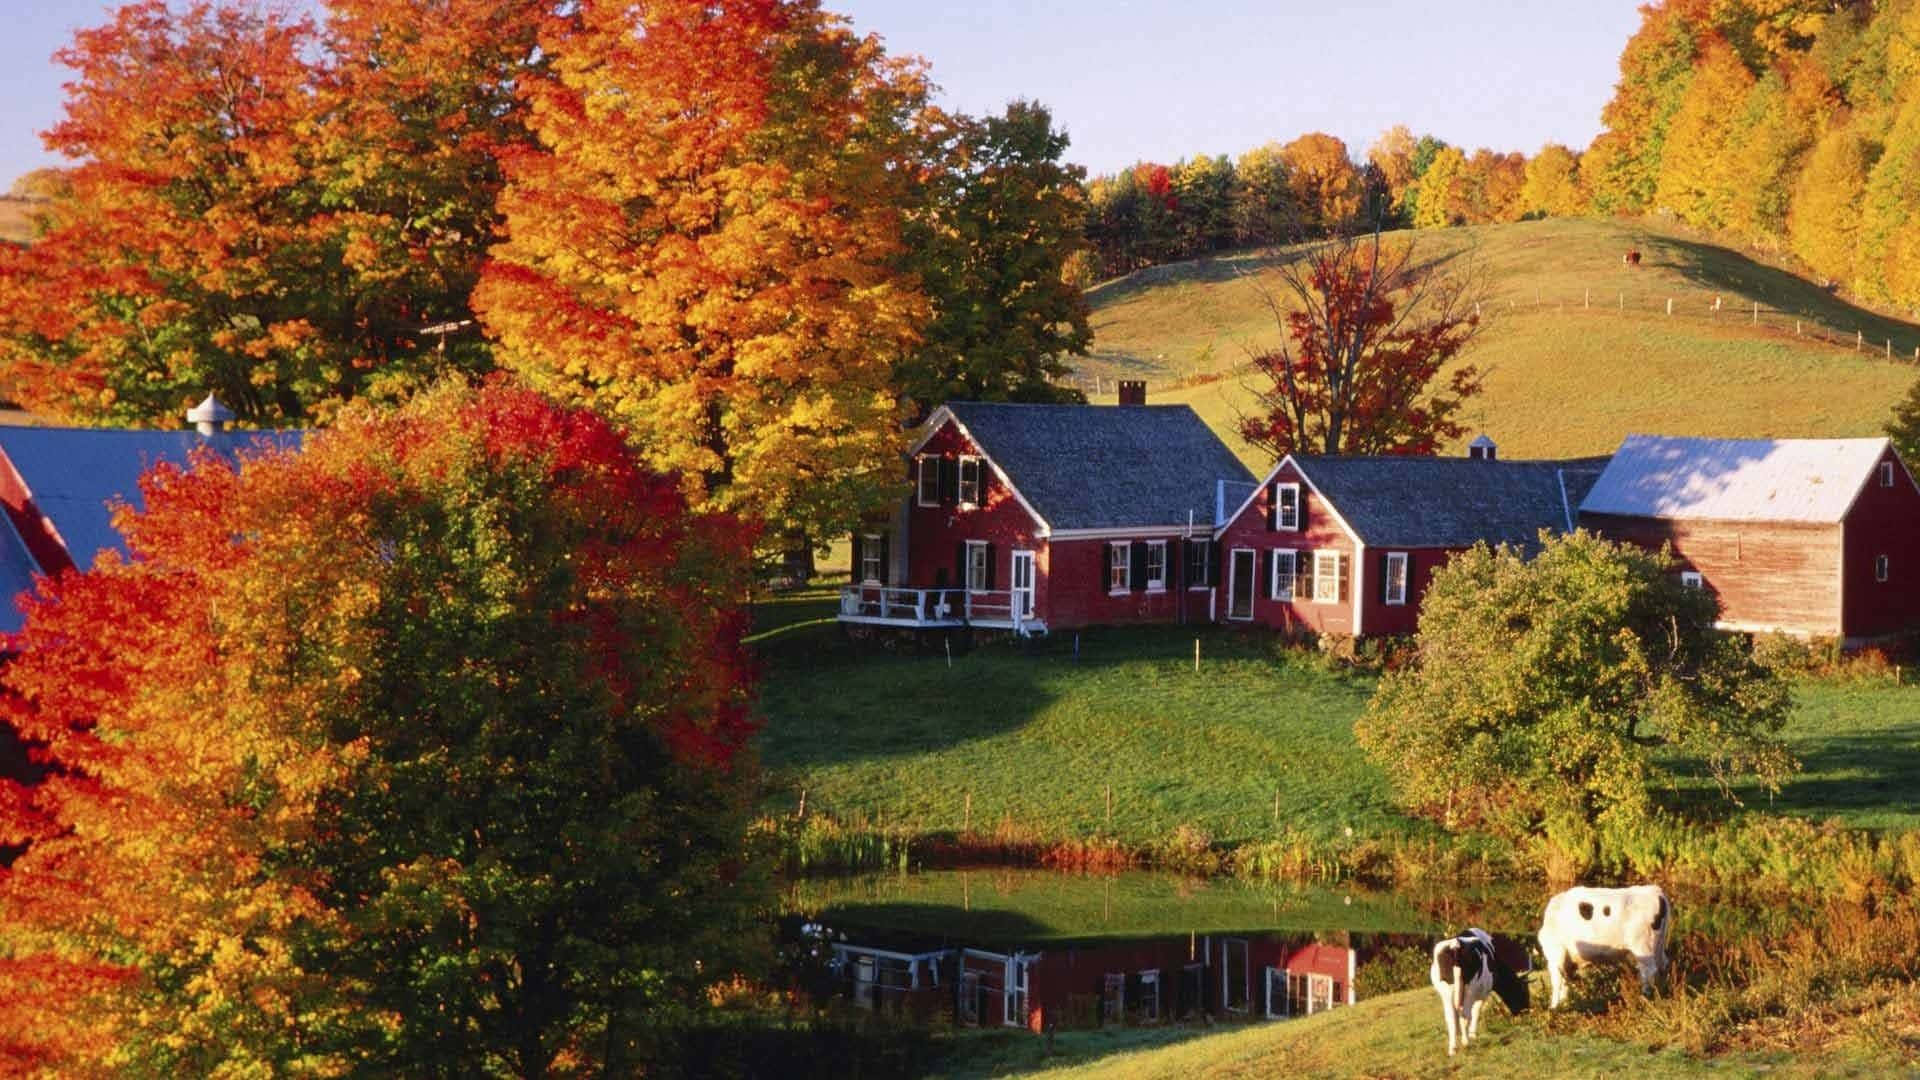 Traditional Red Barn nestled in the countryside